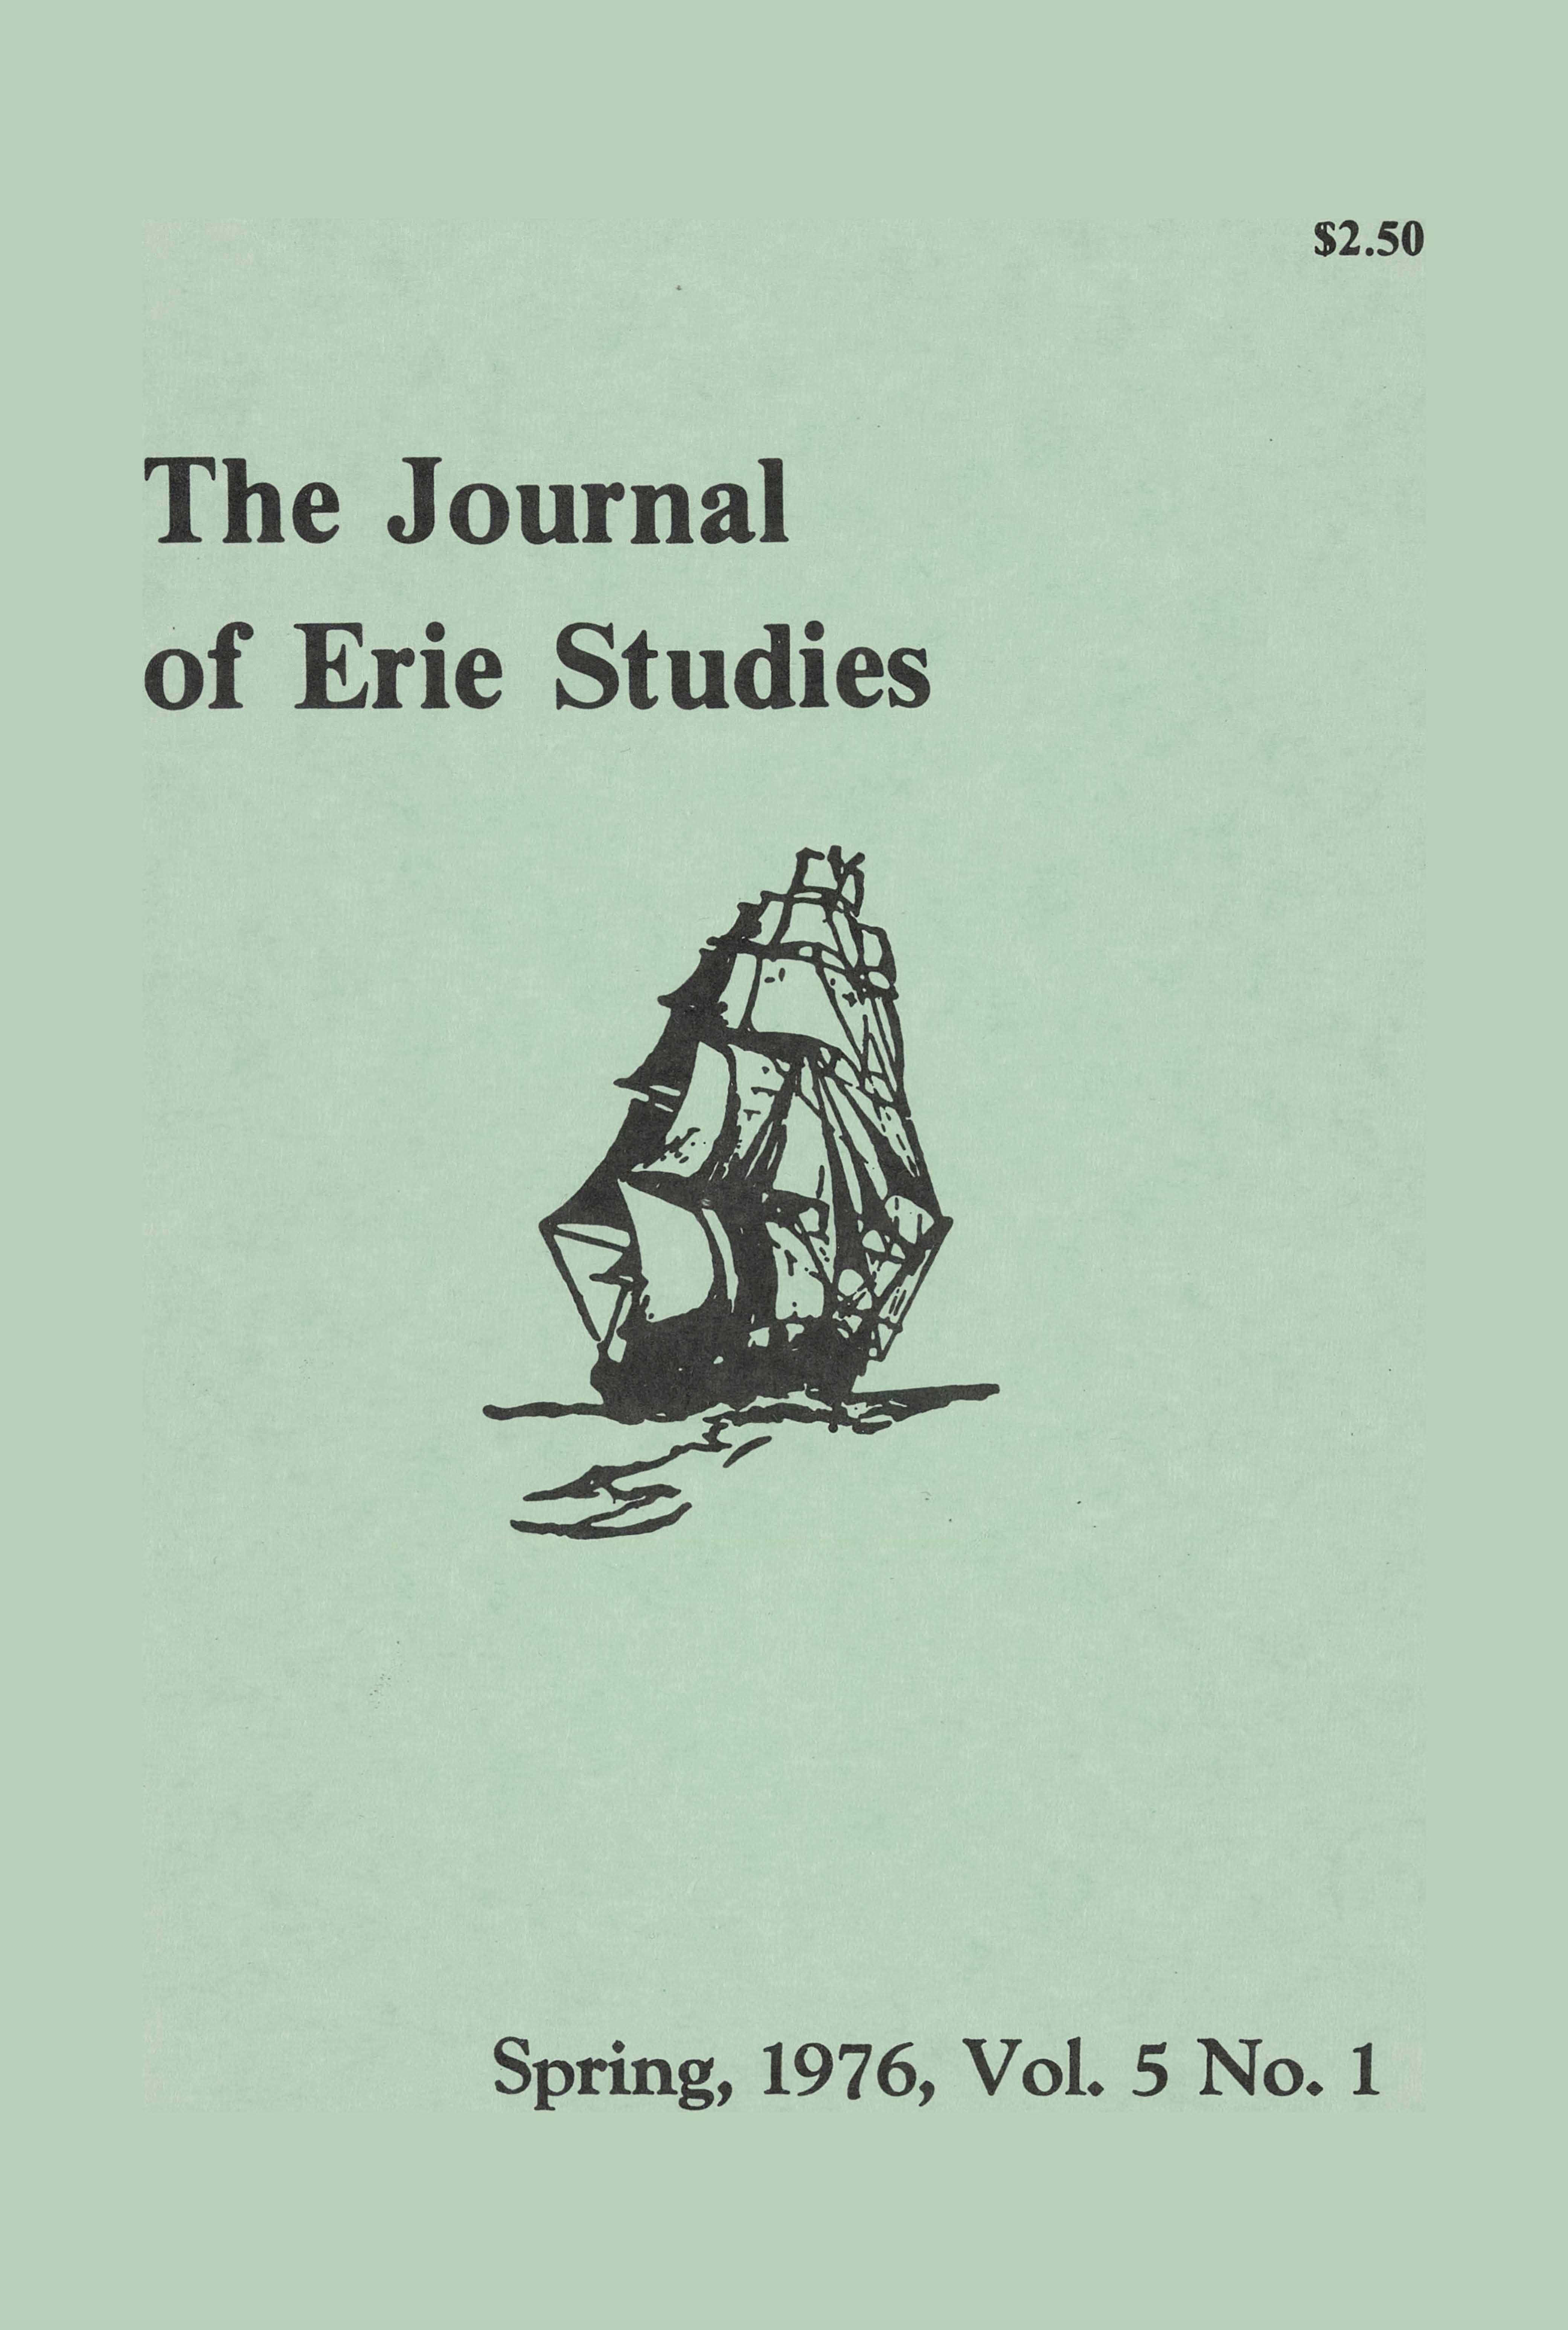 Cover of the spring 1976 issue of The Journal of Erie Studies.